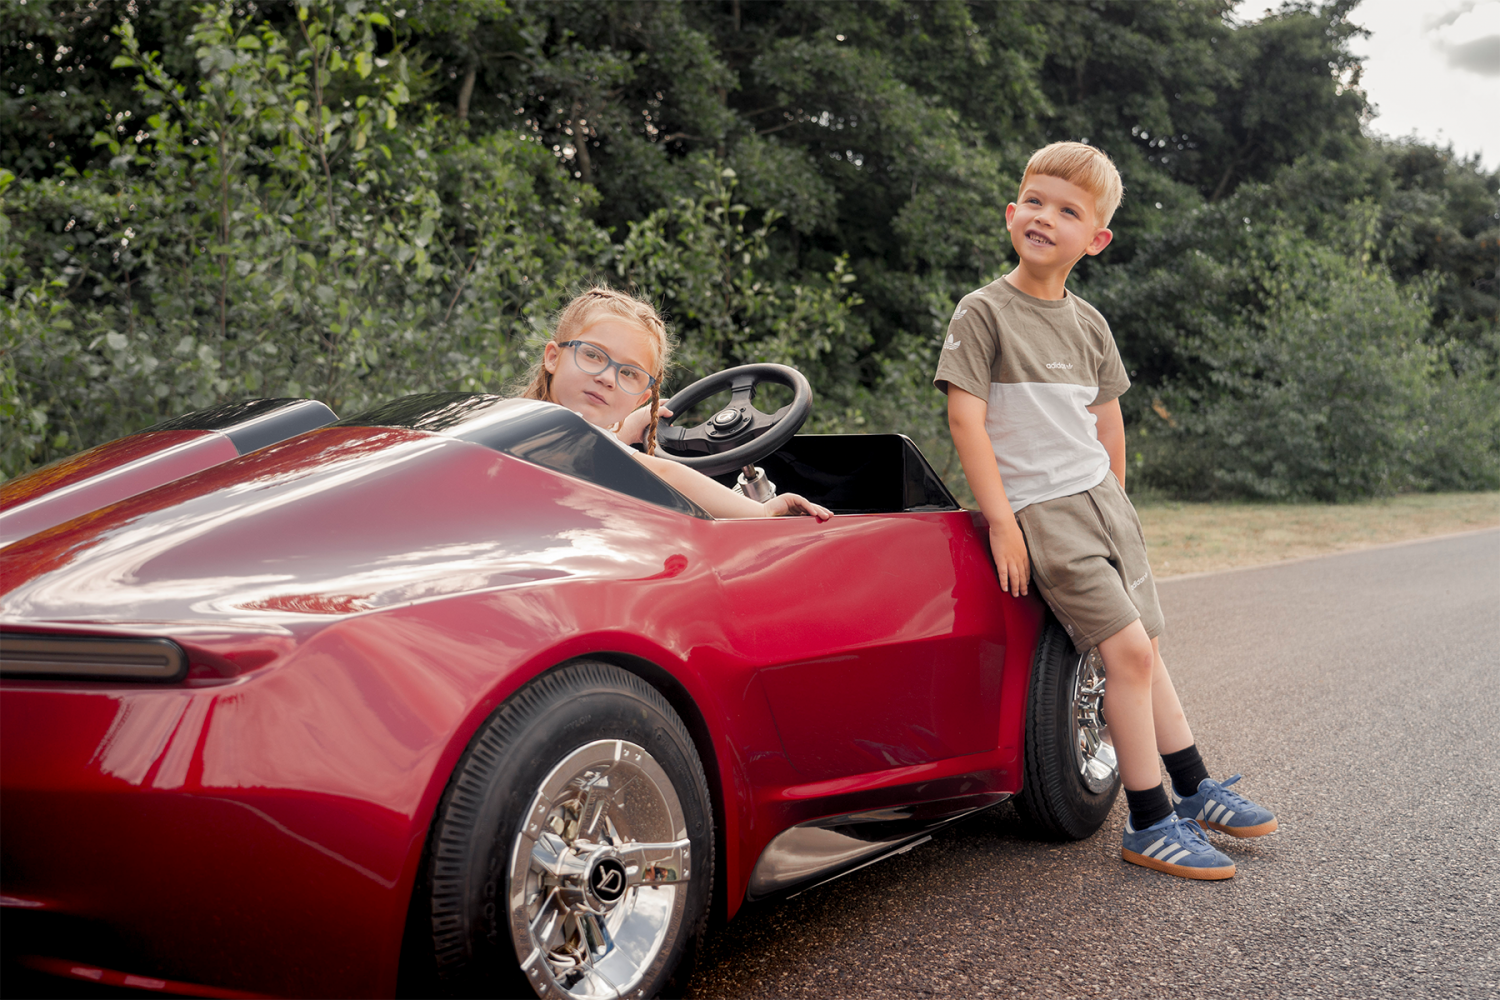 The electric car giving driving lessons to children under 10